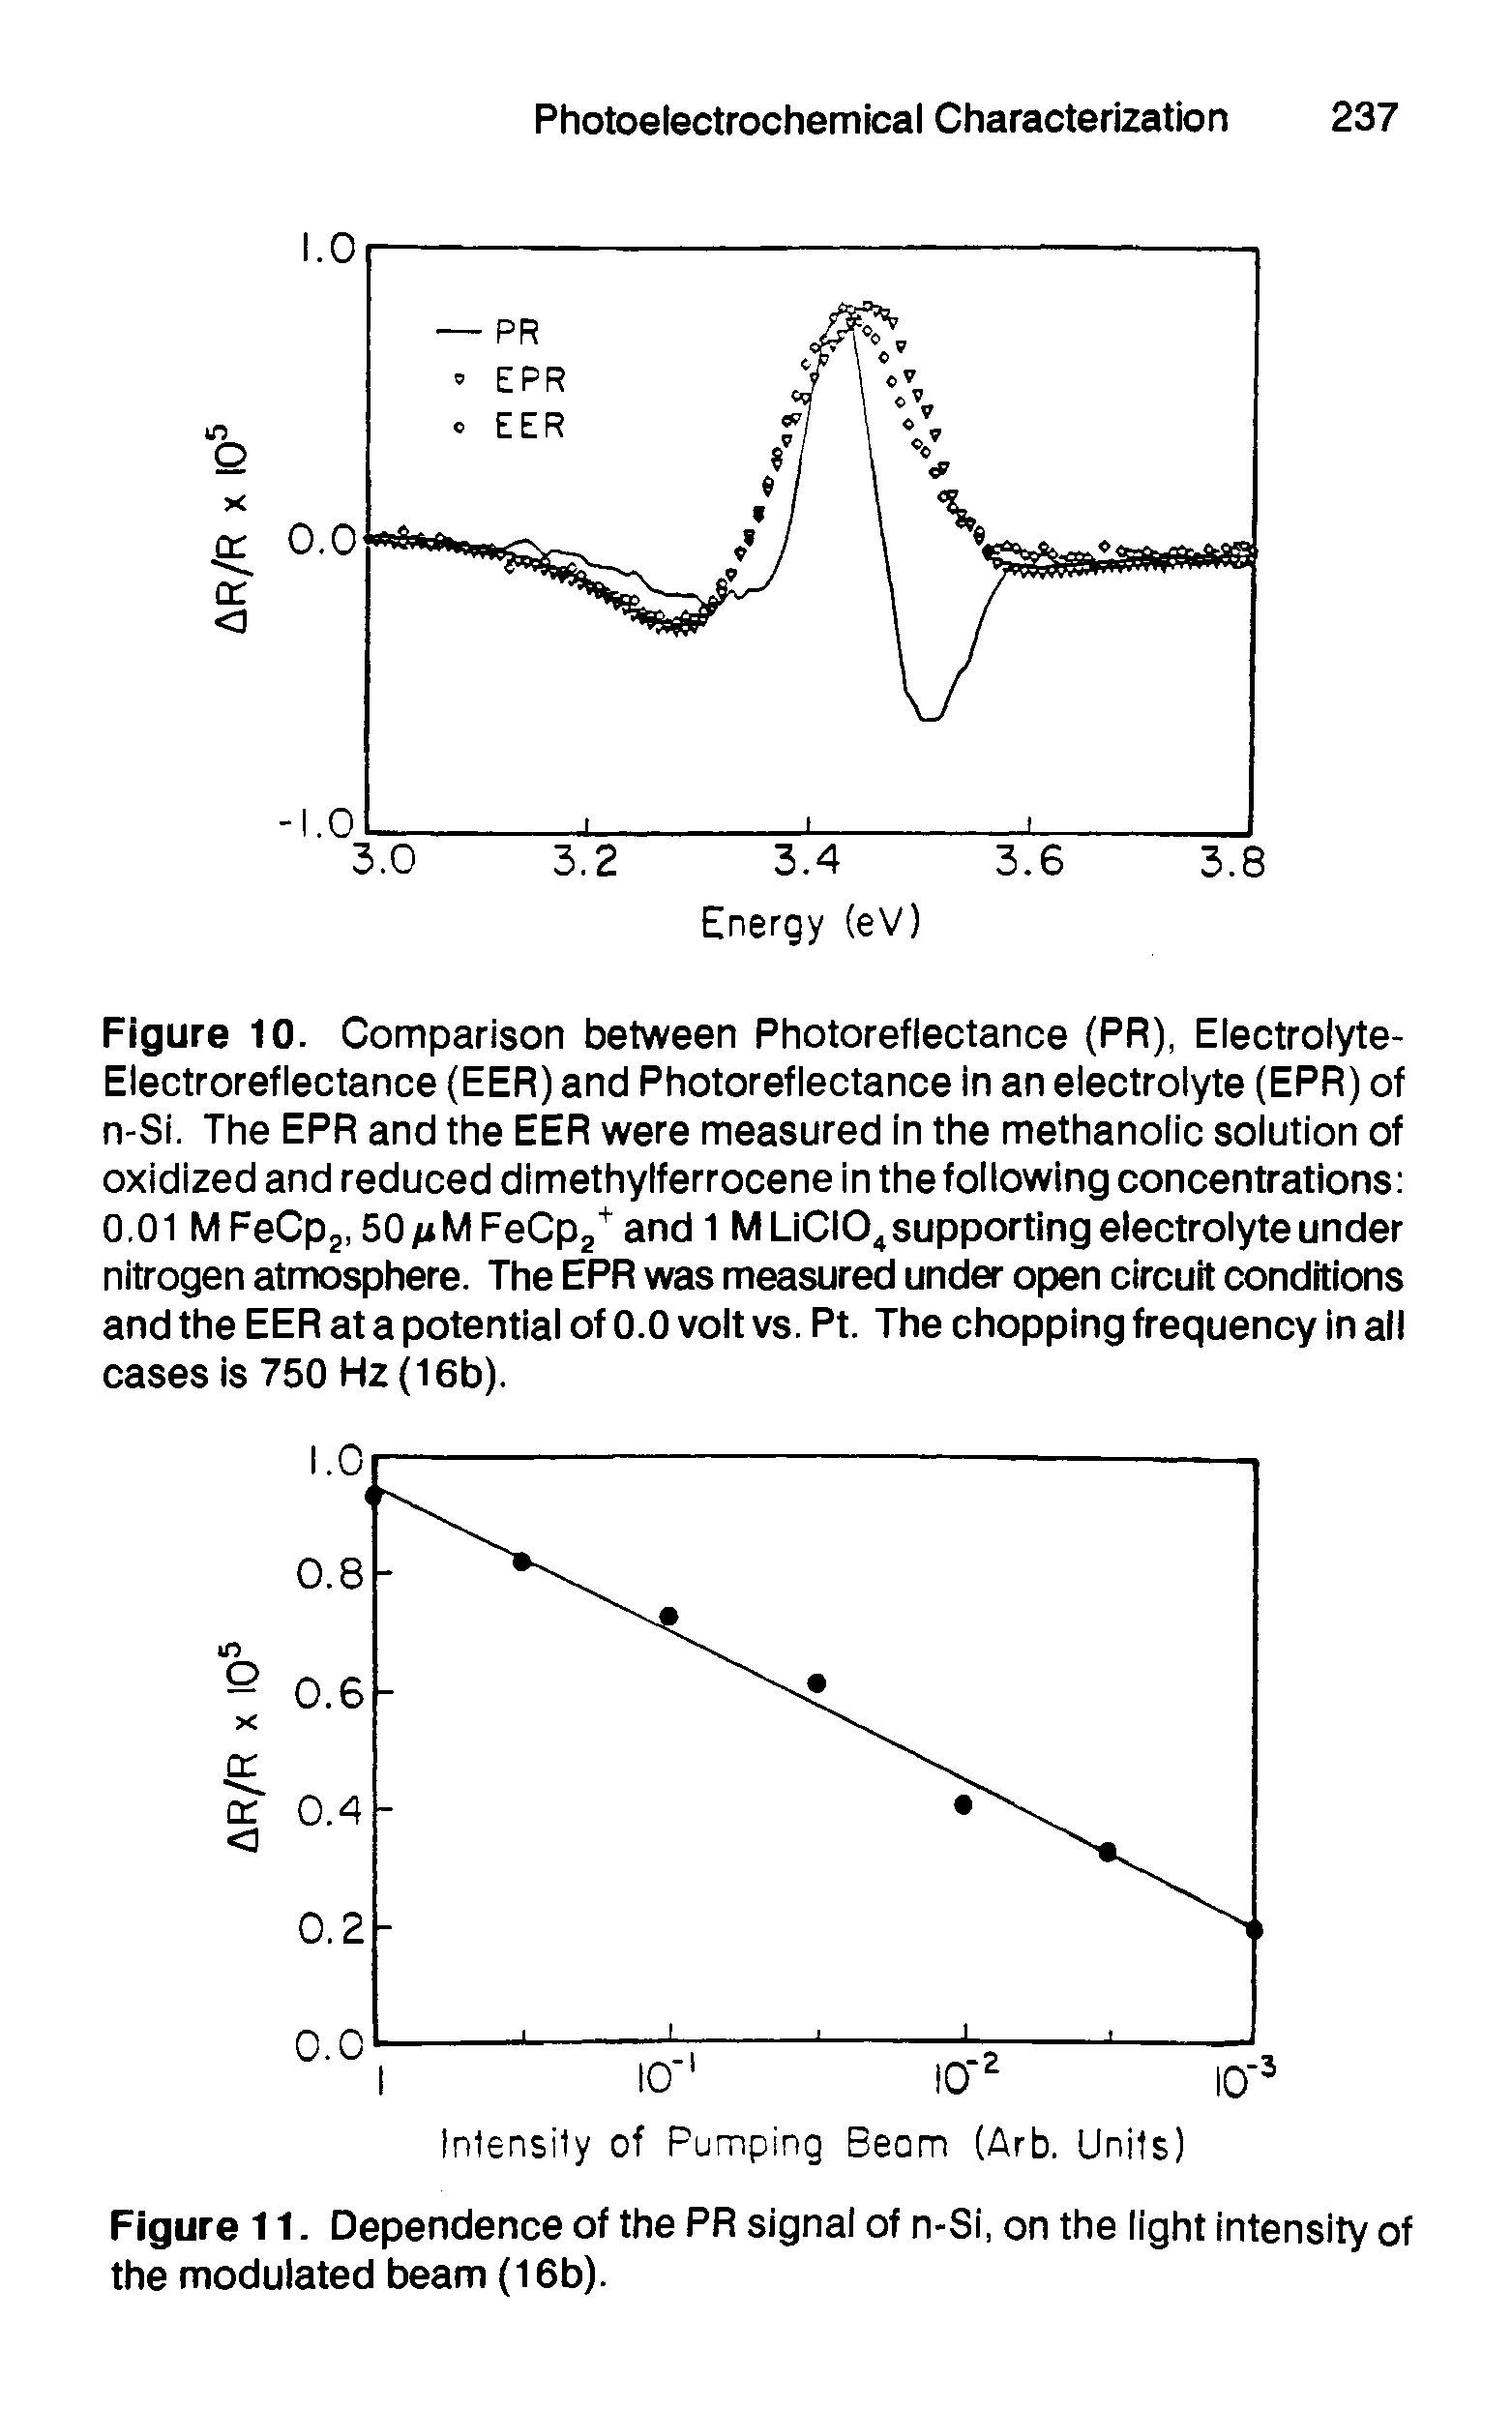 Figure 10. Comparison between Photoreflectance (PR), Electrolyte-Electroreflectance (EER) and Photoreflectance in an electrolyte (EPR) of n-Si. The EPR and the EER were measured In the methanolic solution of oxidized and reduced dimethylferrocene in thefollowing concentrations 0,01 MFeCpj, SOiiMFeCPa andl MLiCIO supporting electrolyte under nitrogen atmosphere. The EPR was measured under open circuit conditions and the EER at a potential of 0.0 volt vs. Pt. The chopping frequency in all cases is 750 Hz (16b).